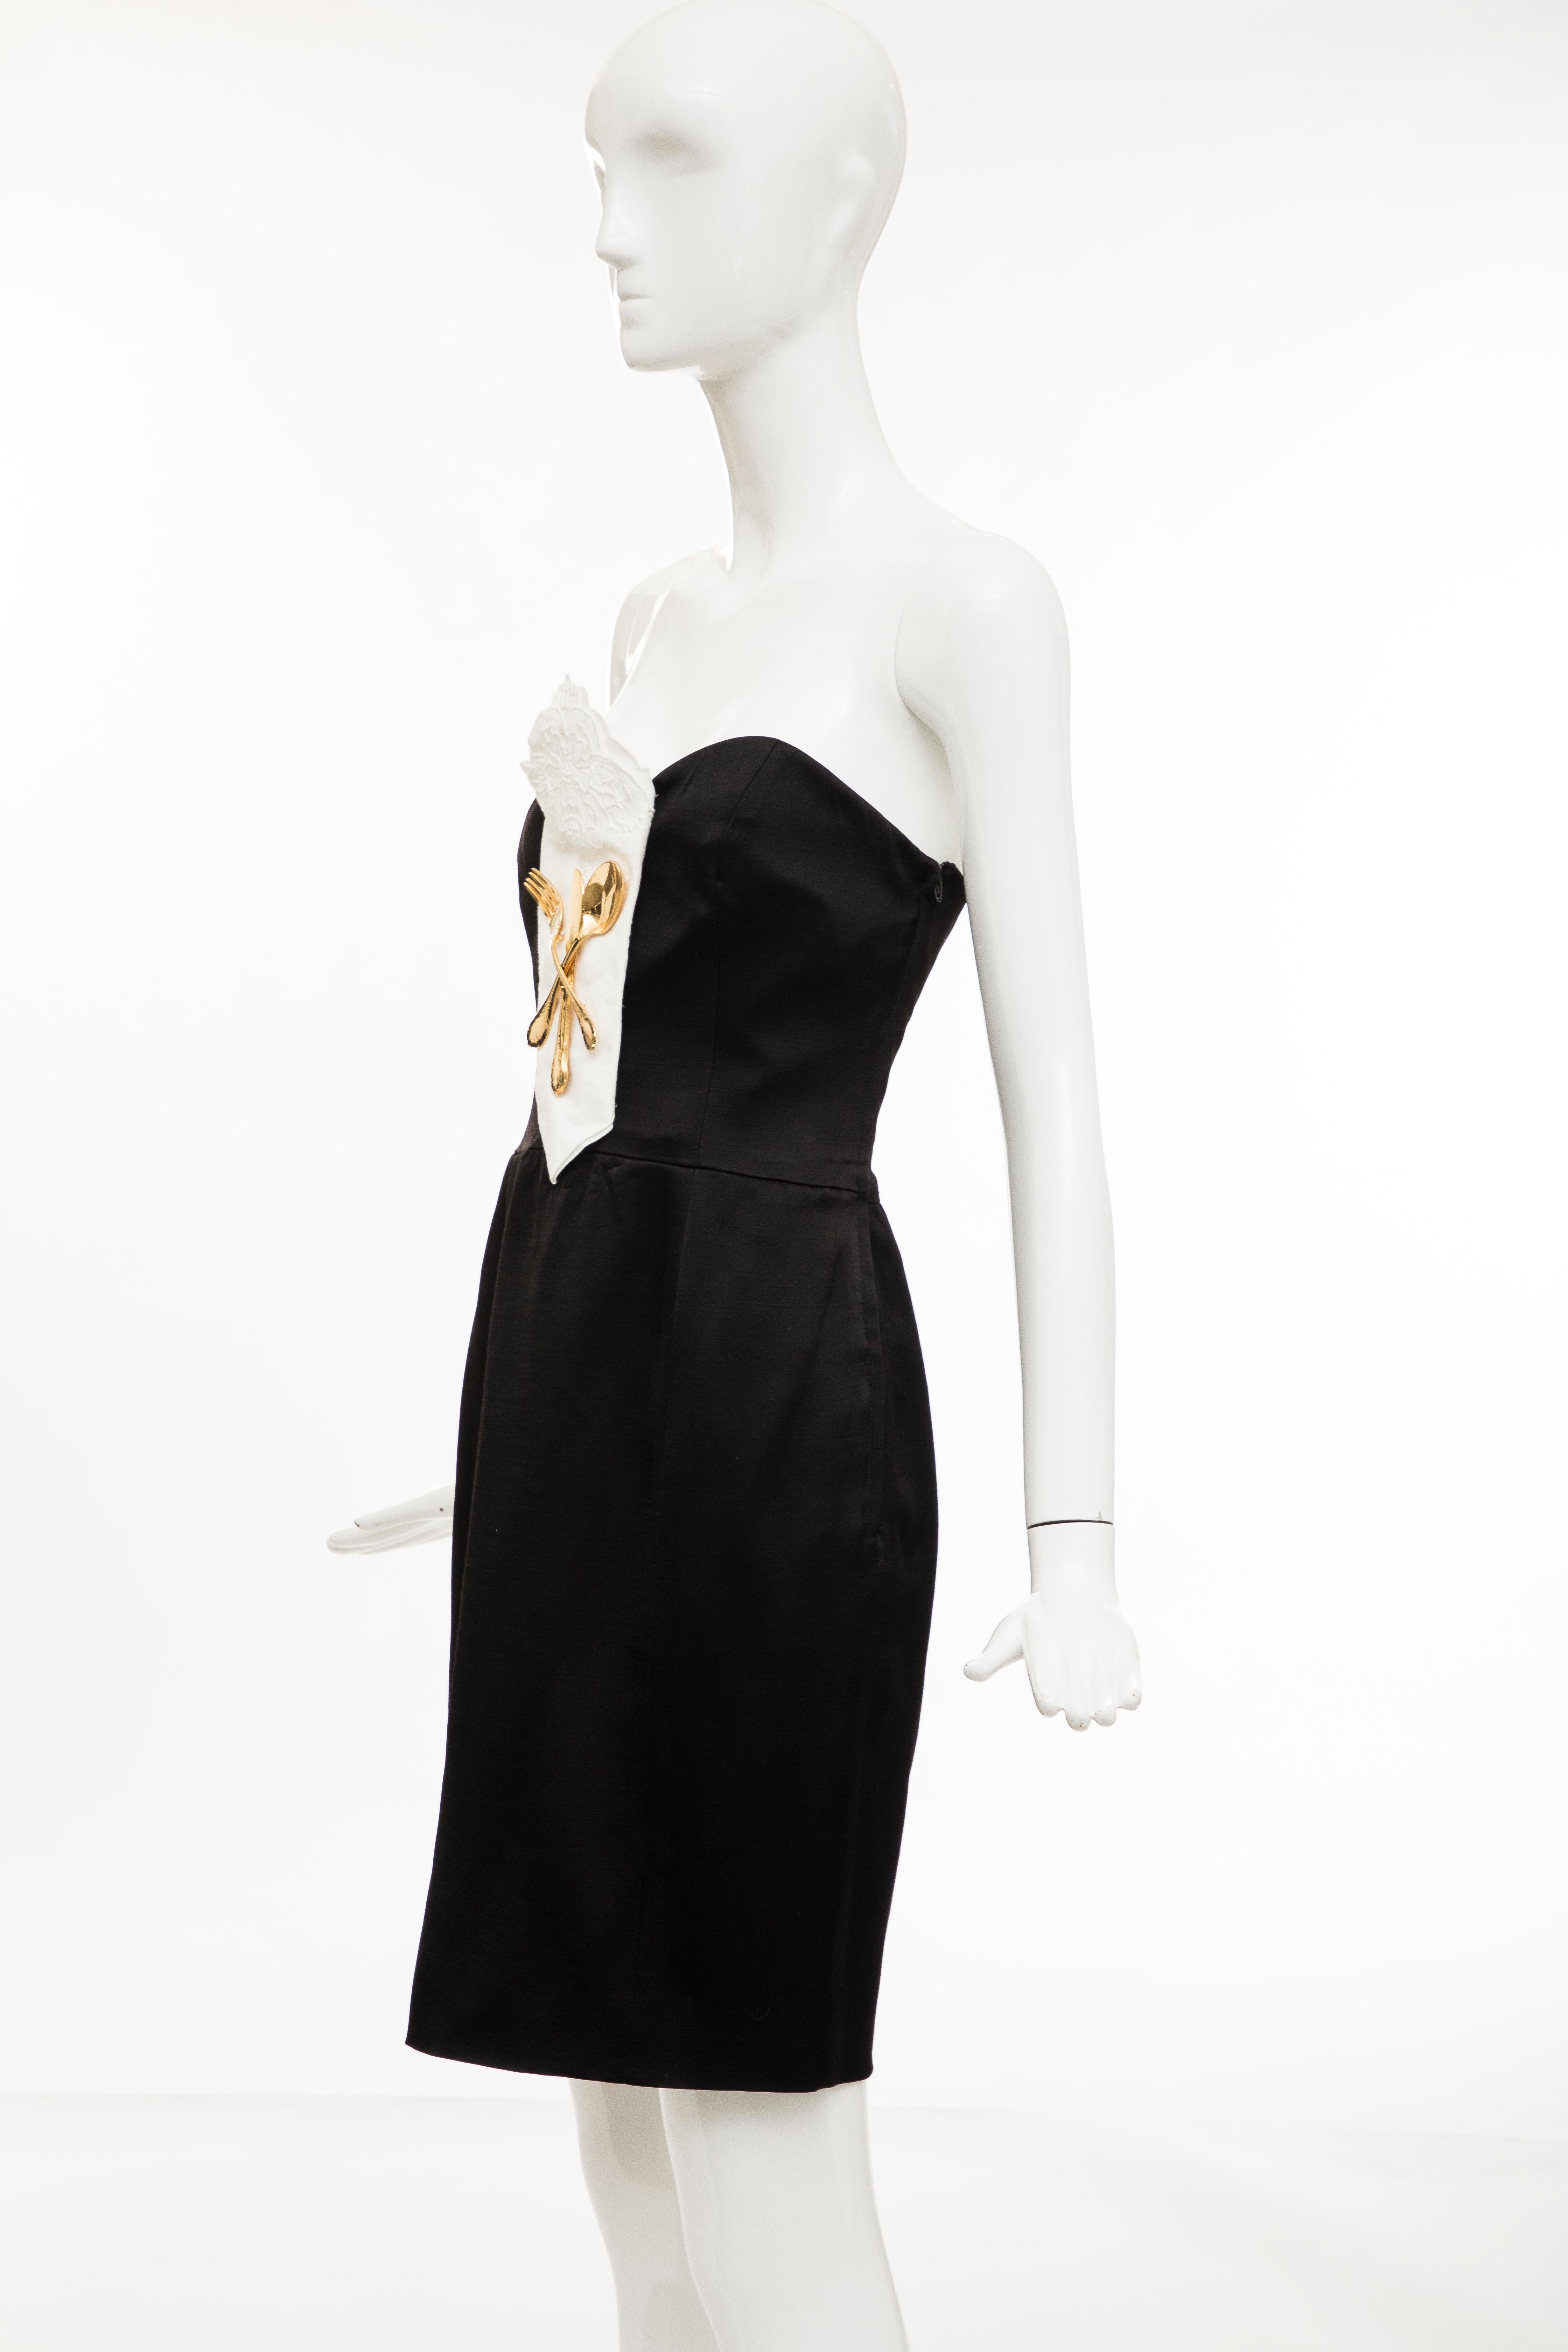 Moschino Couture Black Wool Strapless Dress Show Off Collection, Fall 1989 2